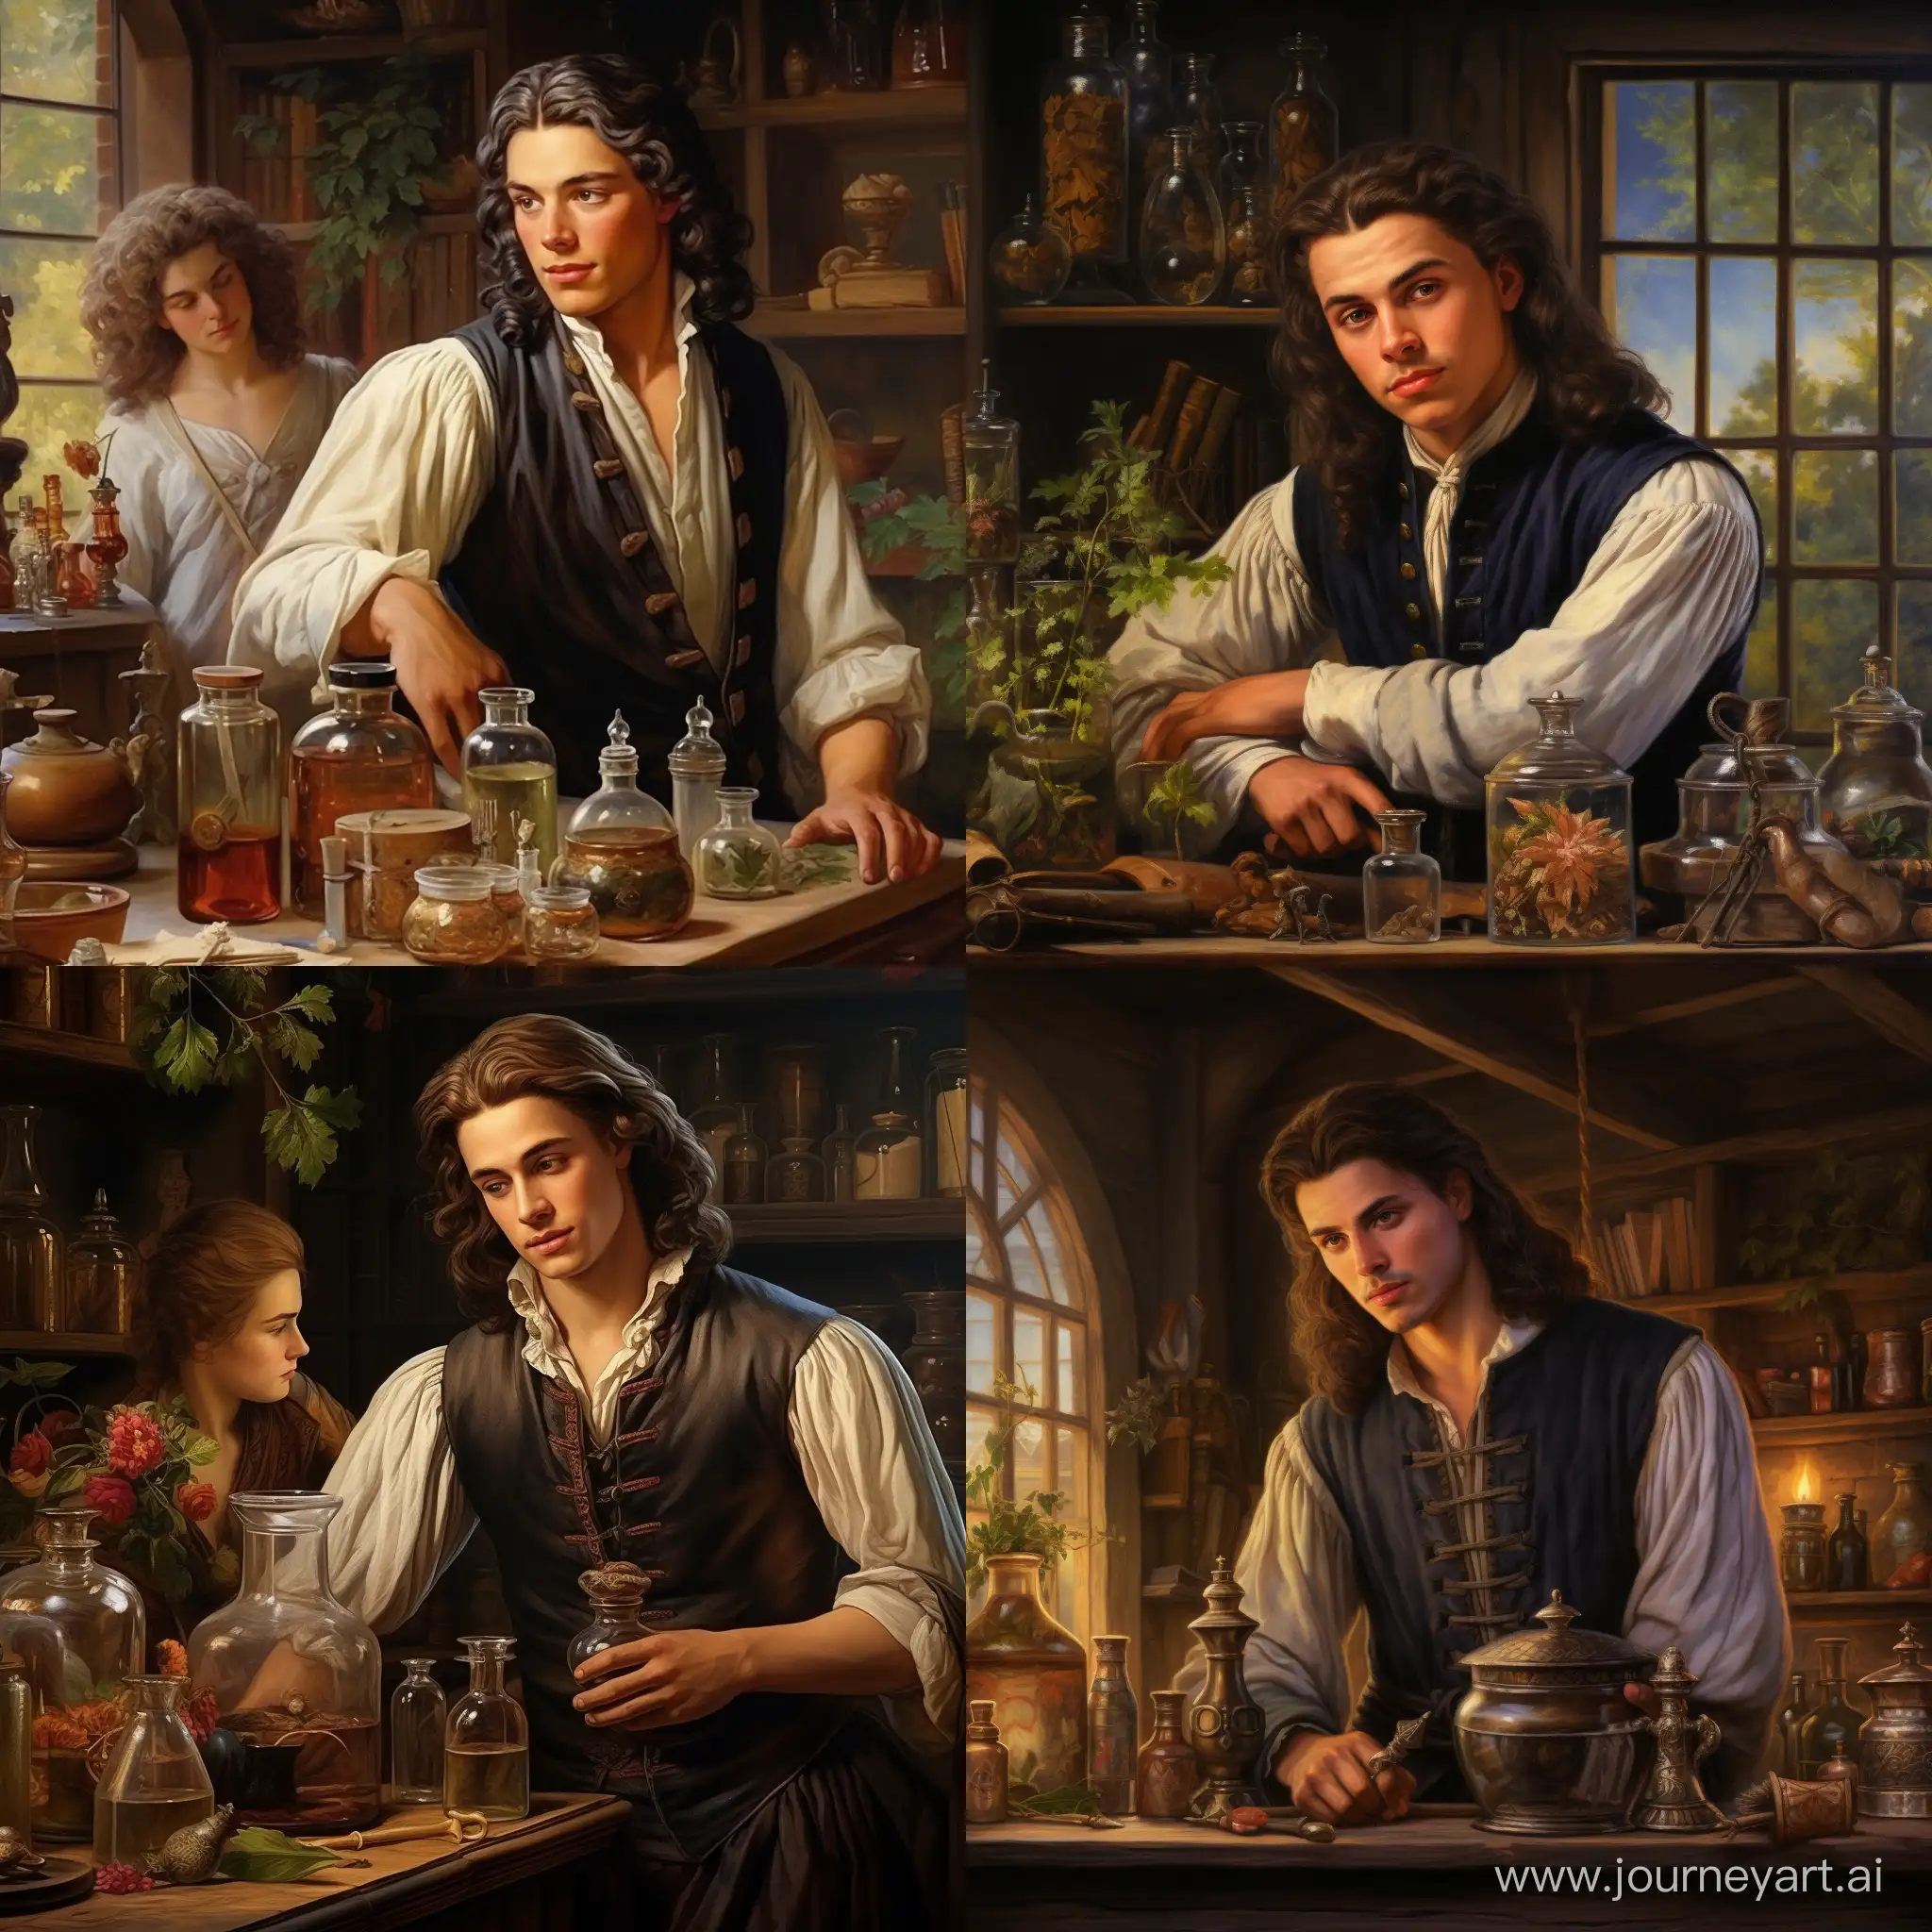 Elegant-18th-Century-Perfumer-Crafting-Scents-with-Mysterious-Companion